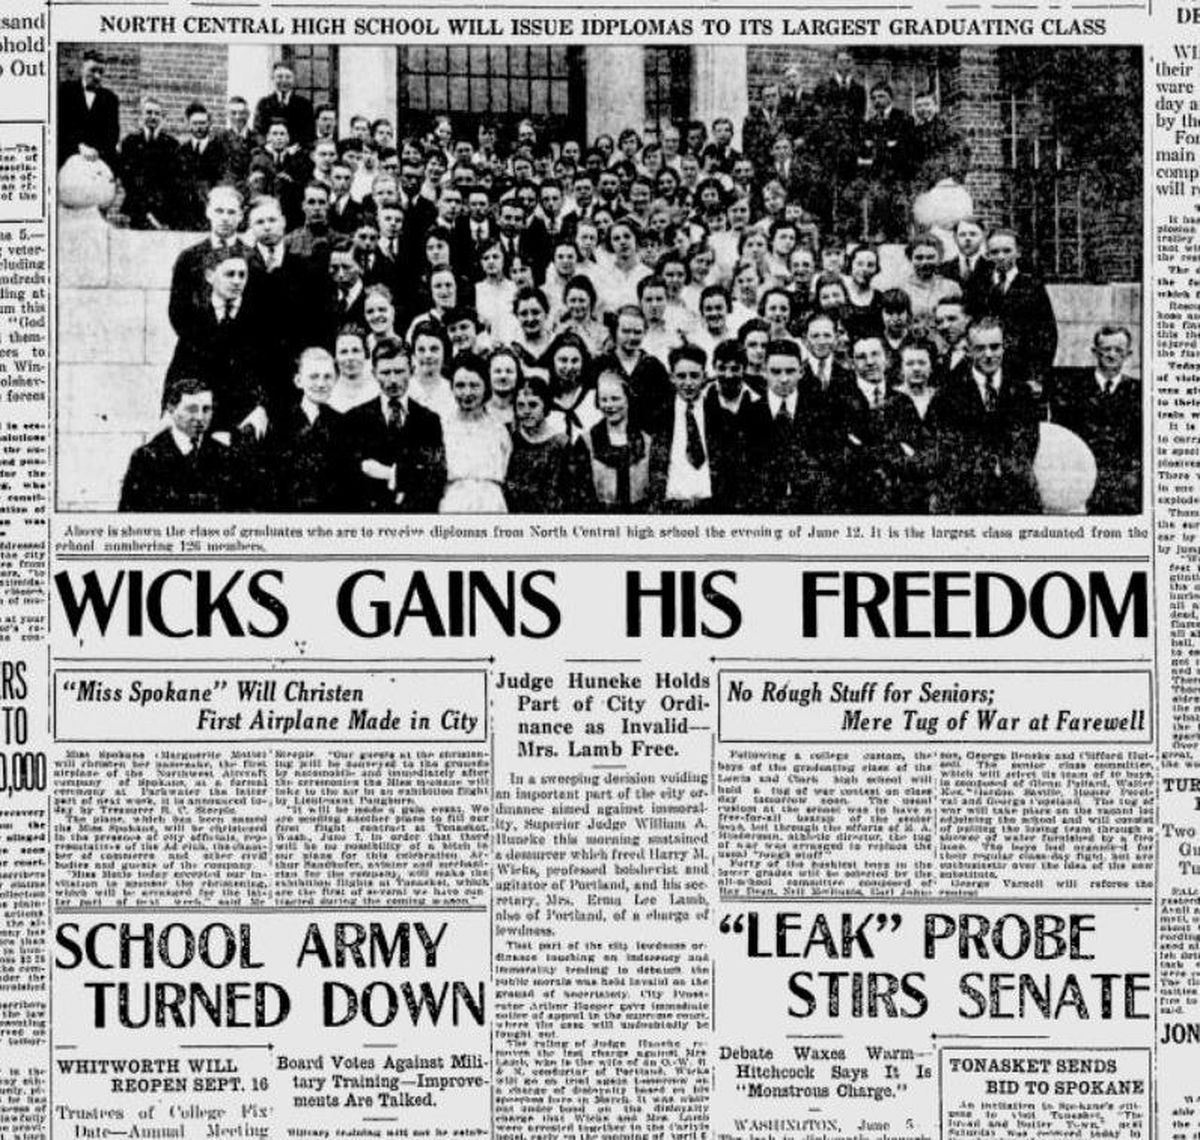 A Superior Court judge dismissed the “lewdness” conviction against “professed bolshevist” Harry M. Wicks and his secretary, Mrs. Erma Lee Lamb, the Spokane Daily Chronicle reported on June 5, 1919. The newspaper also ran a picture of North Central High School’s class of 1919. (Spokesman-Review archives)